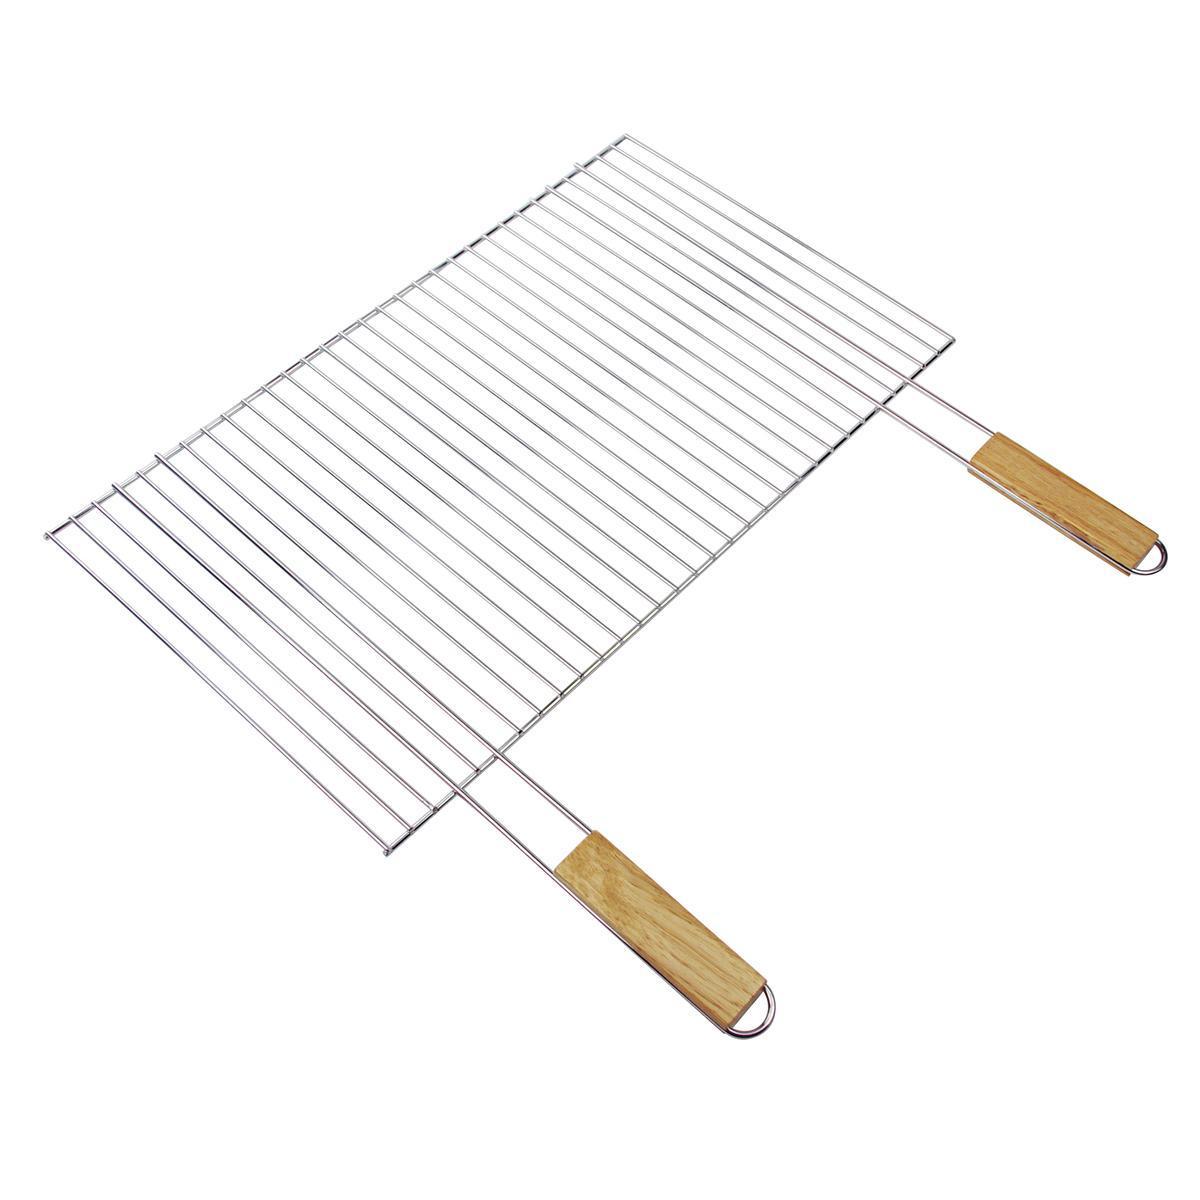 Grille simple pour barbecue